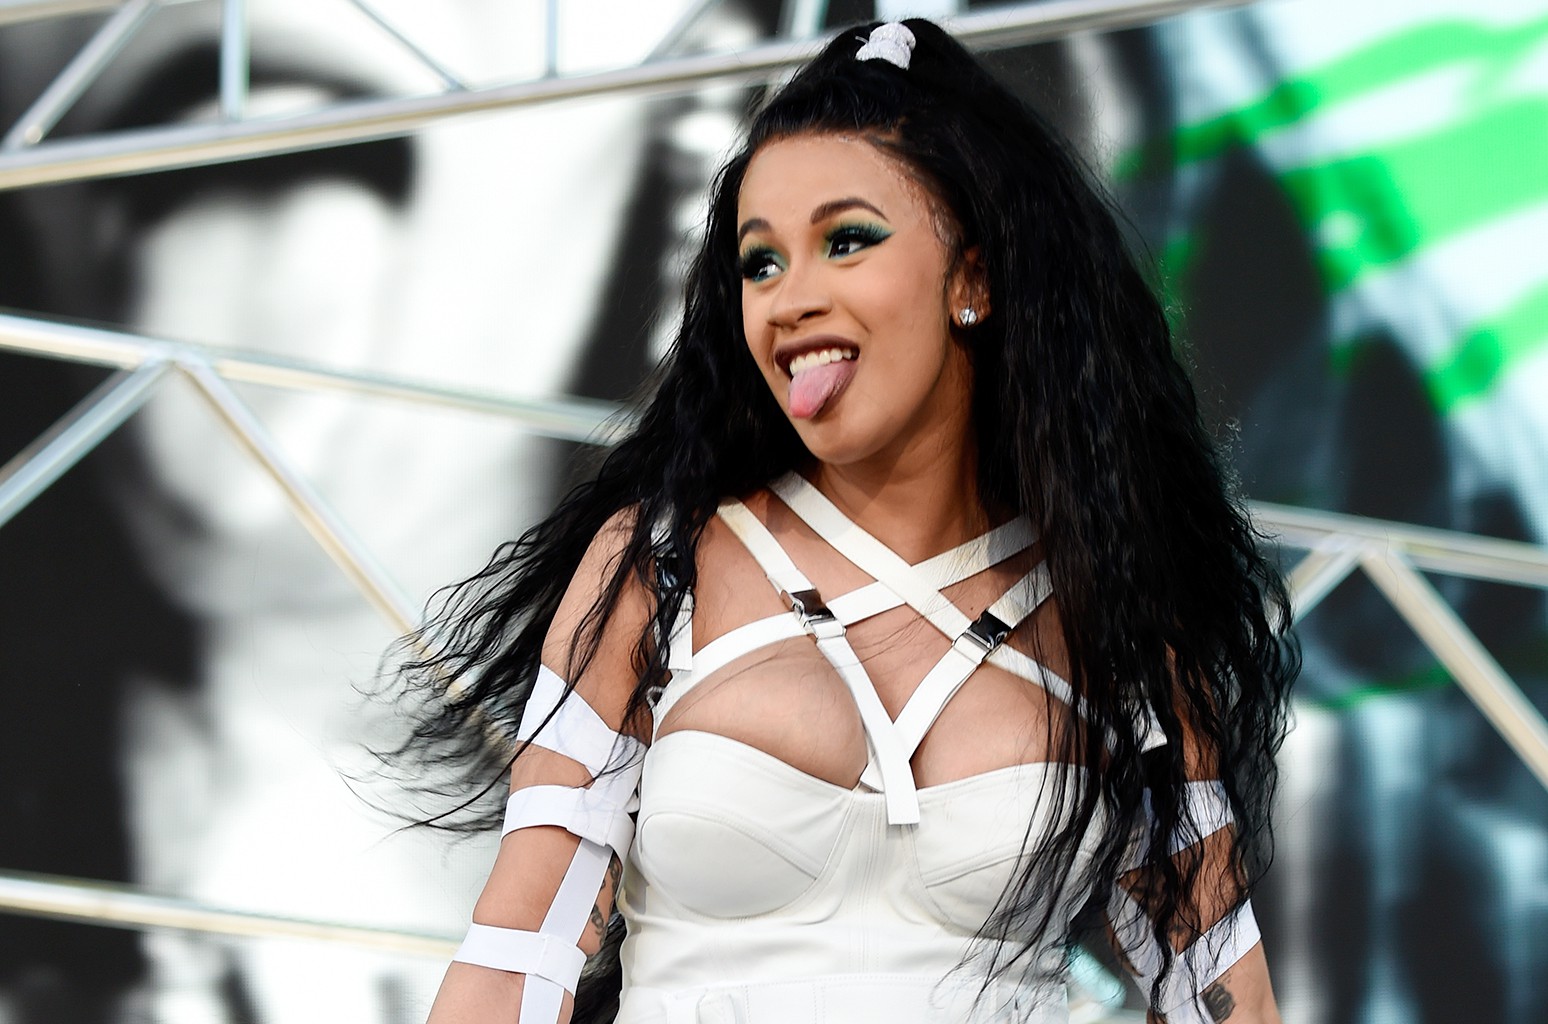 Hearing that Nicki Minaj became the most "swordfish" female rapper of the year, Cardi B rushed to "cheat" to demand justice - Photo 4.